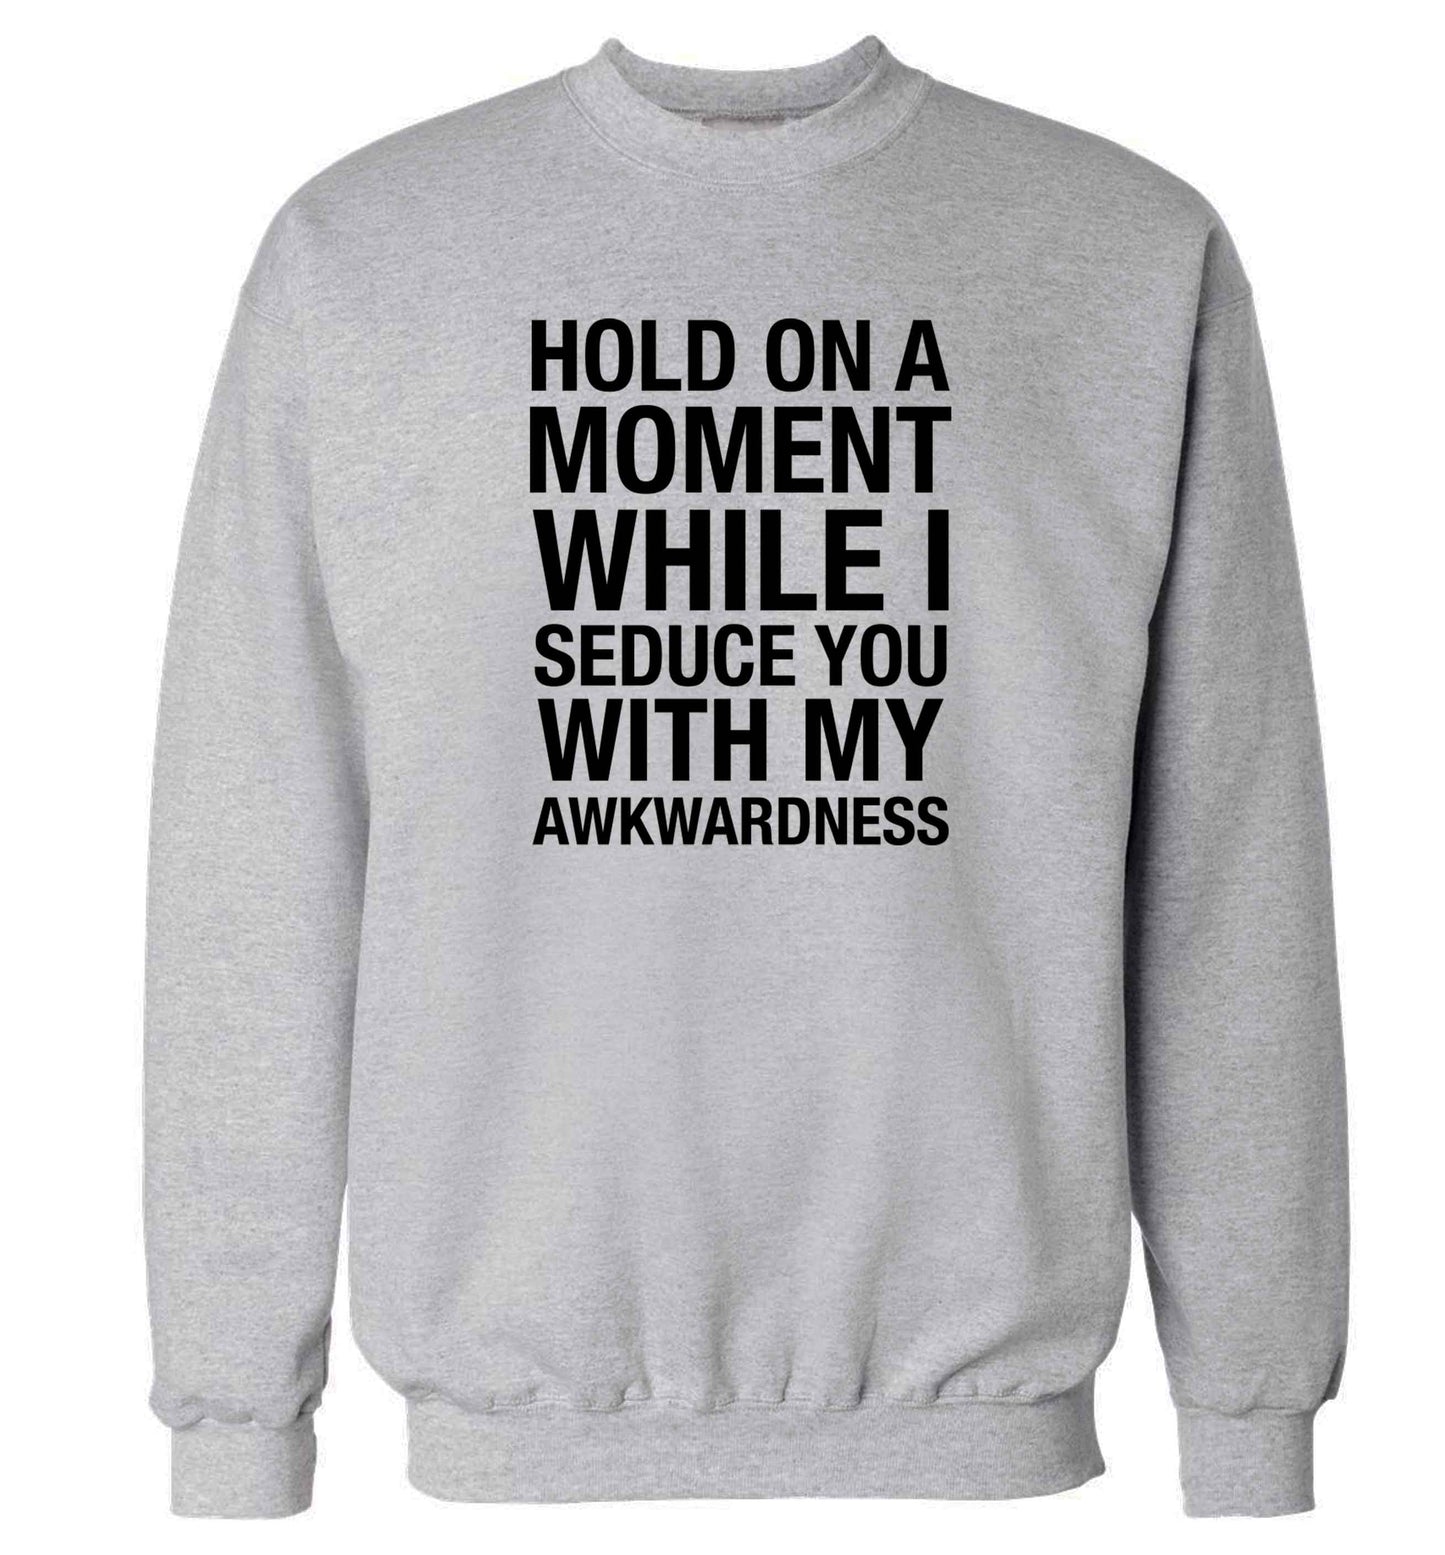 Hold on a moment while I seduce you with my awkwardness adult's unisex grey sweater 2XL